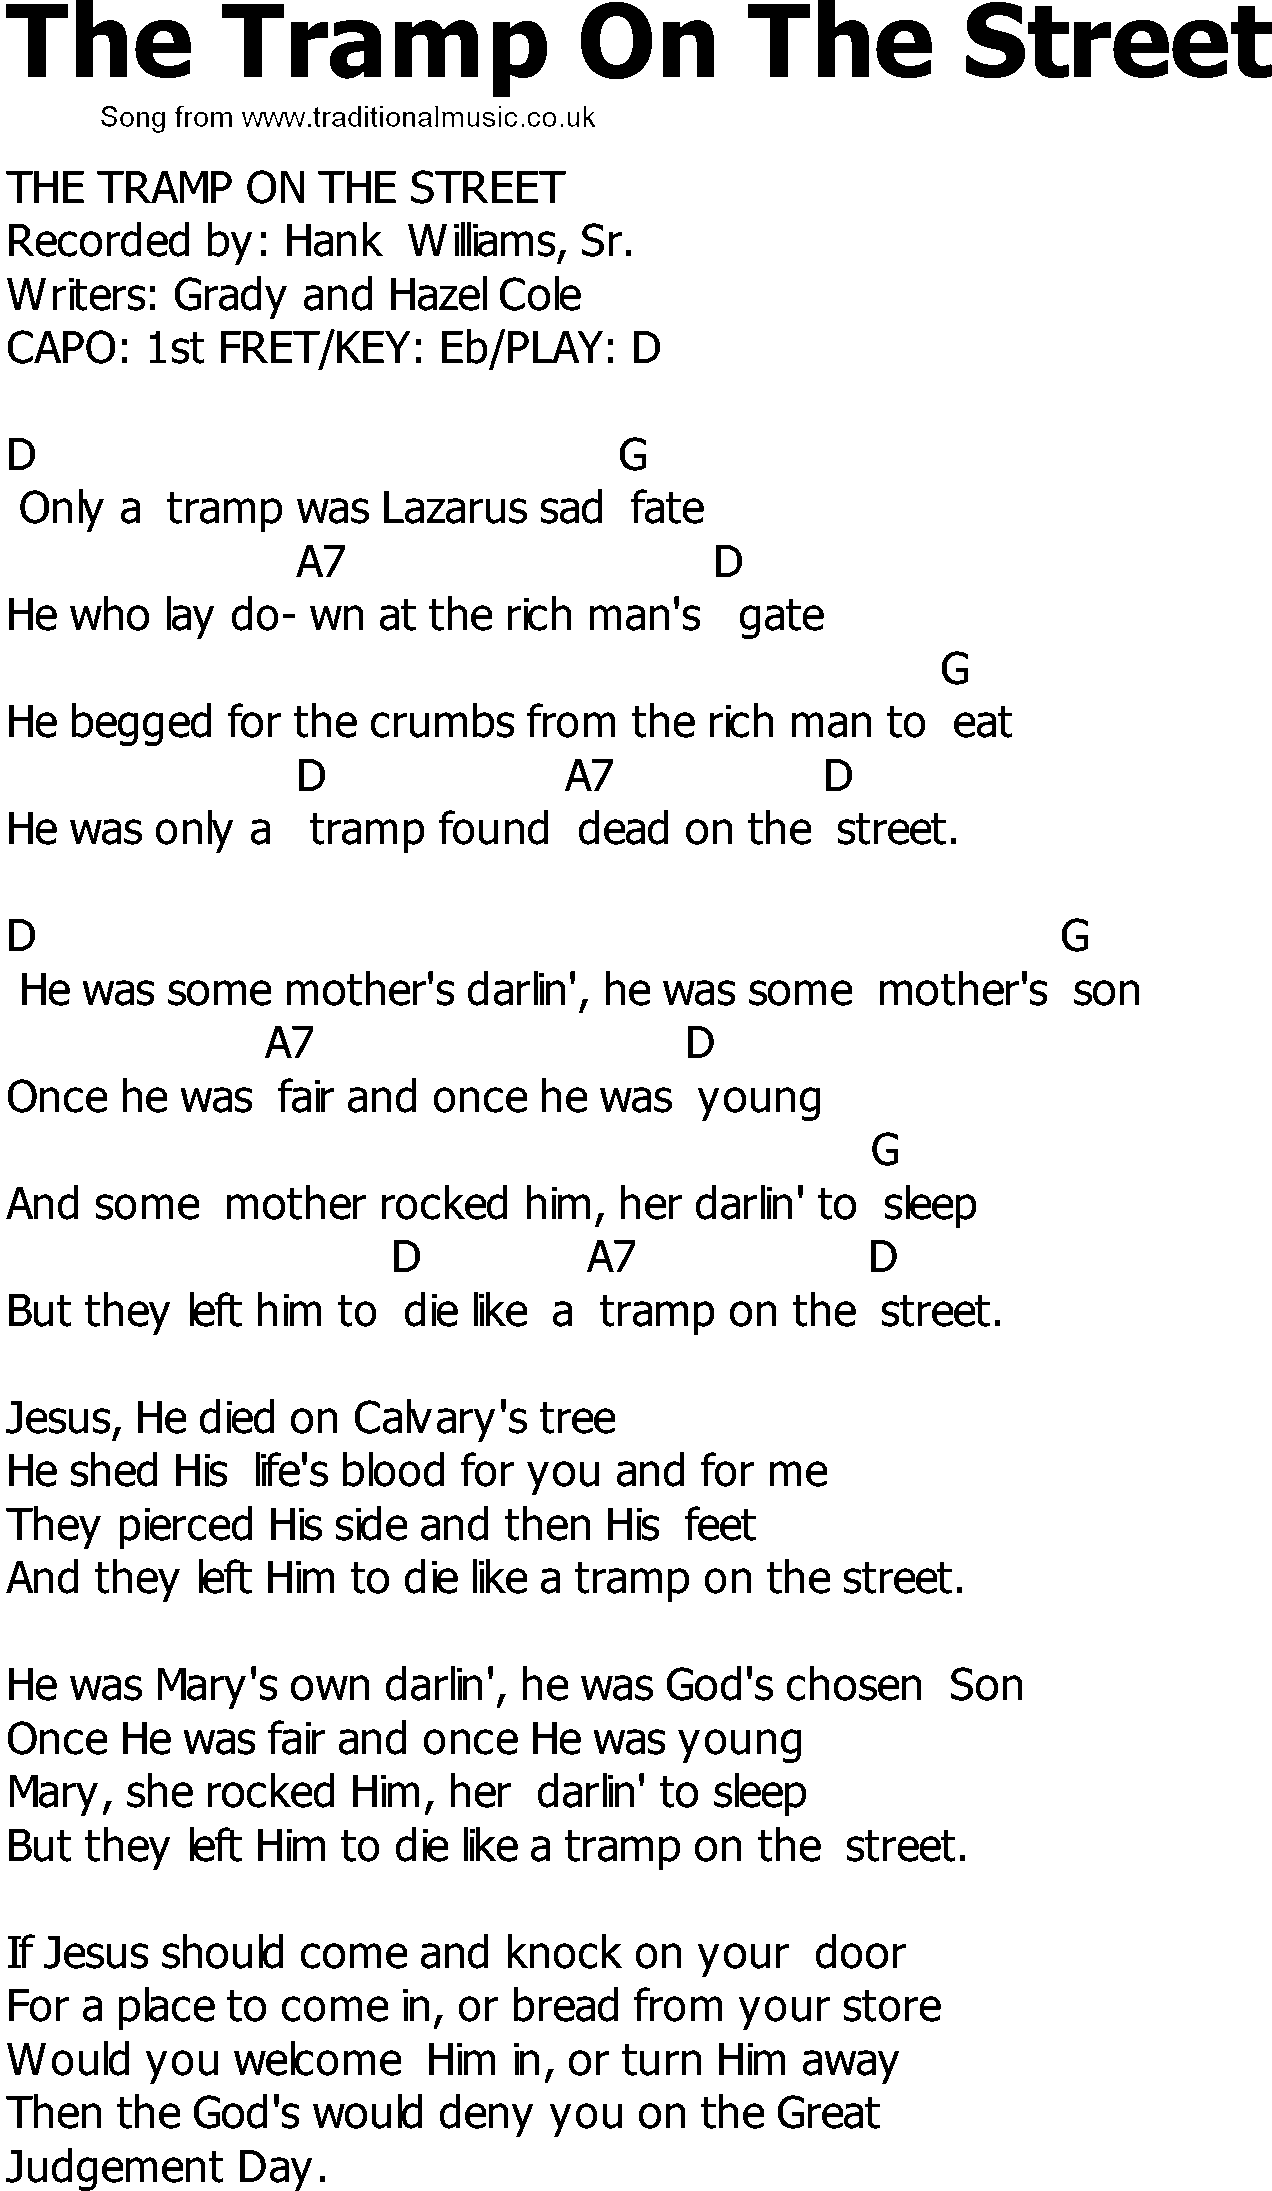 Old Country song lyrics with chords - The Tramp On The Street